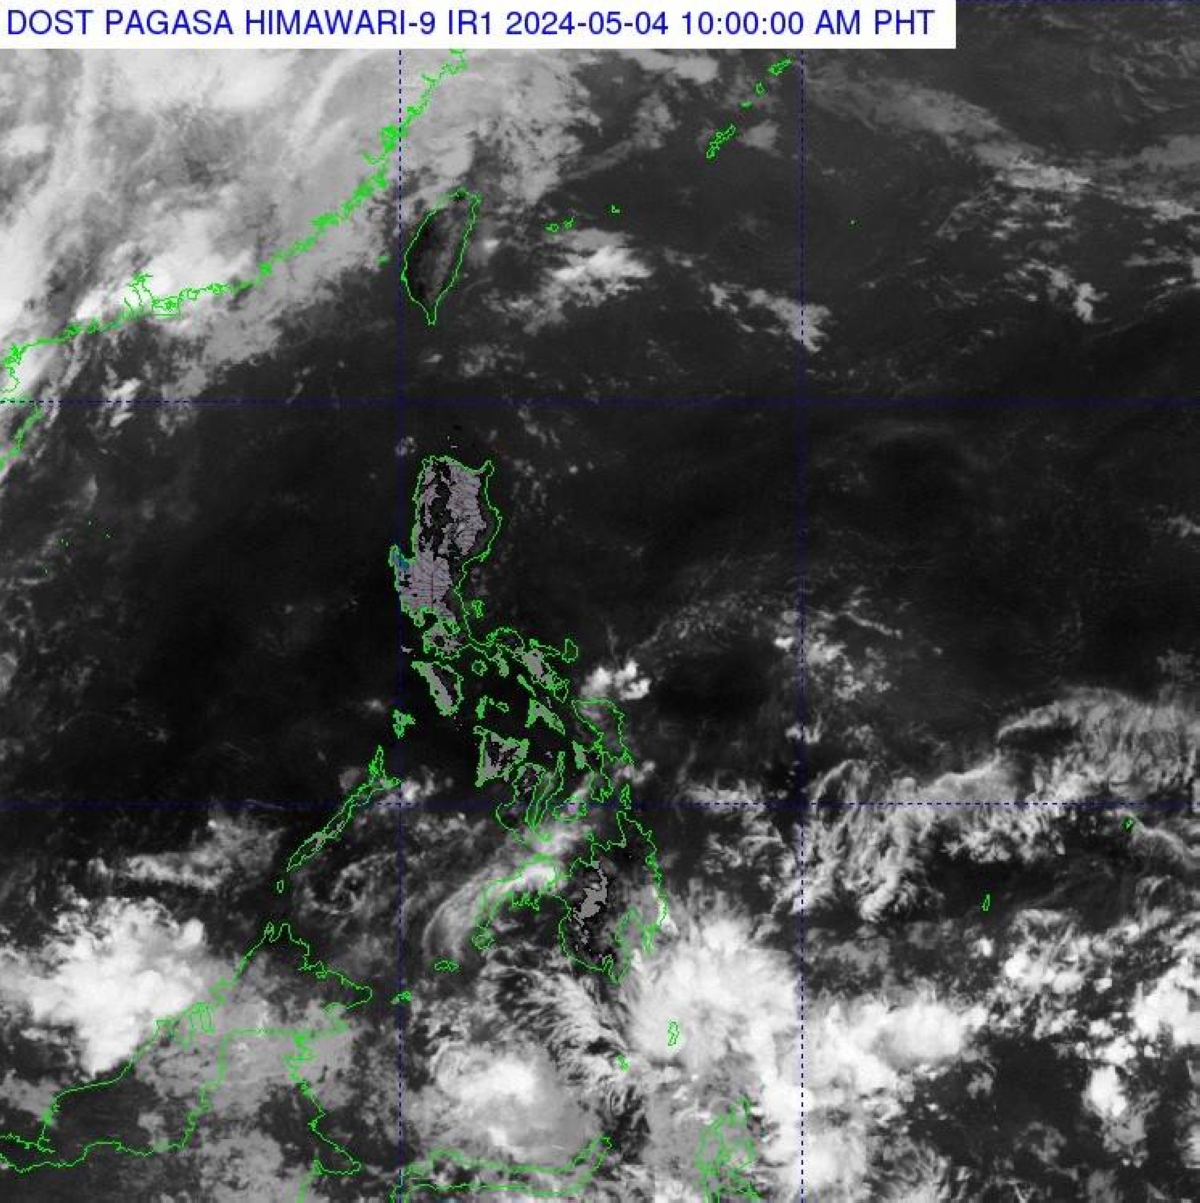 easterlies to bring cloudy skies, thunderstorms in ph – pagasa